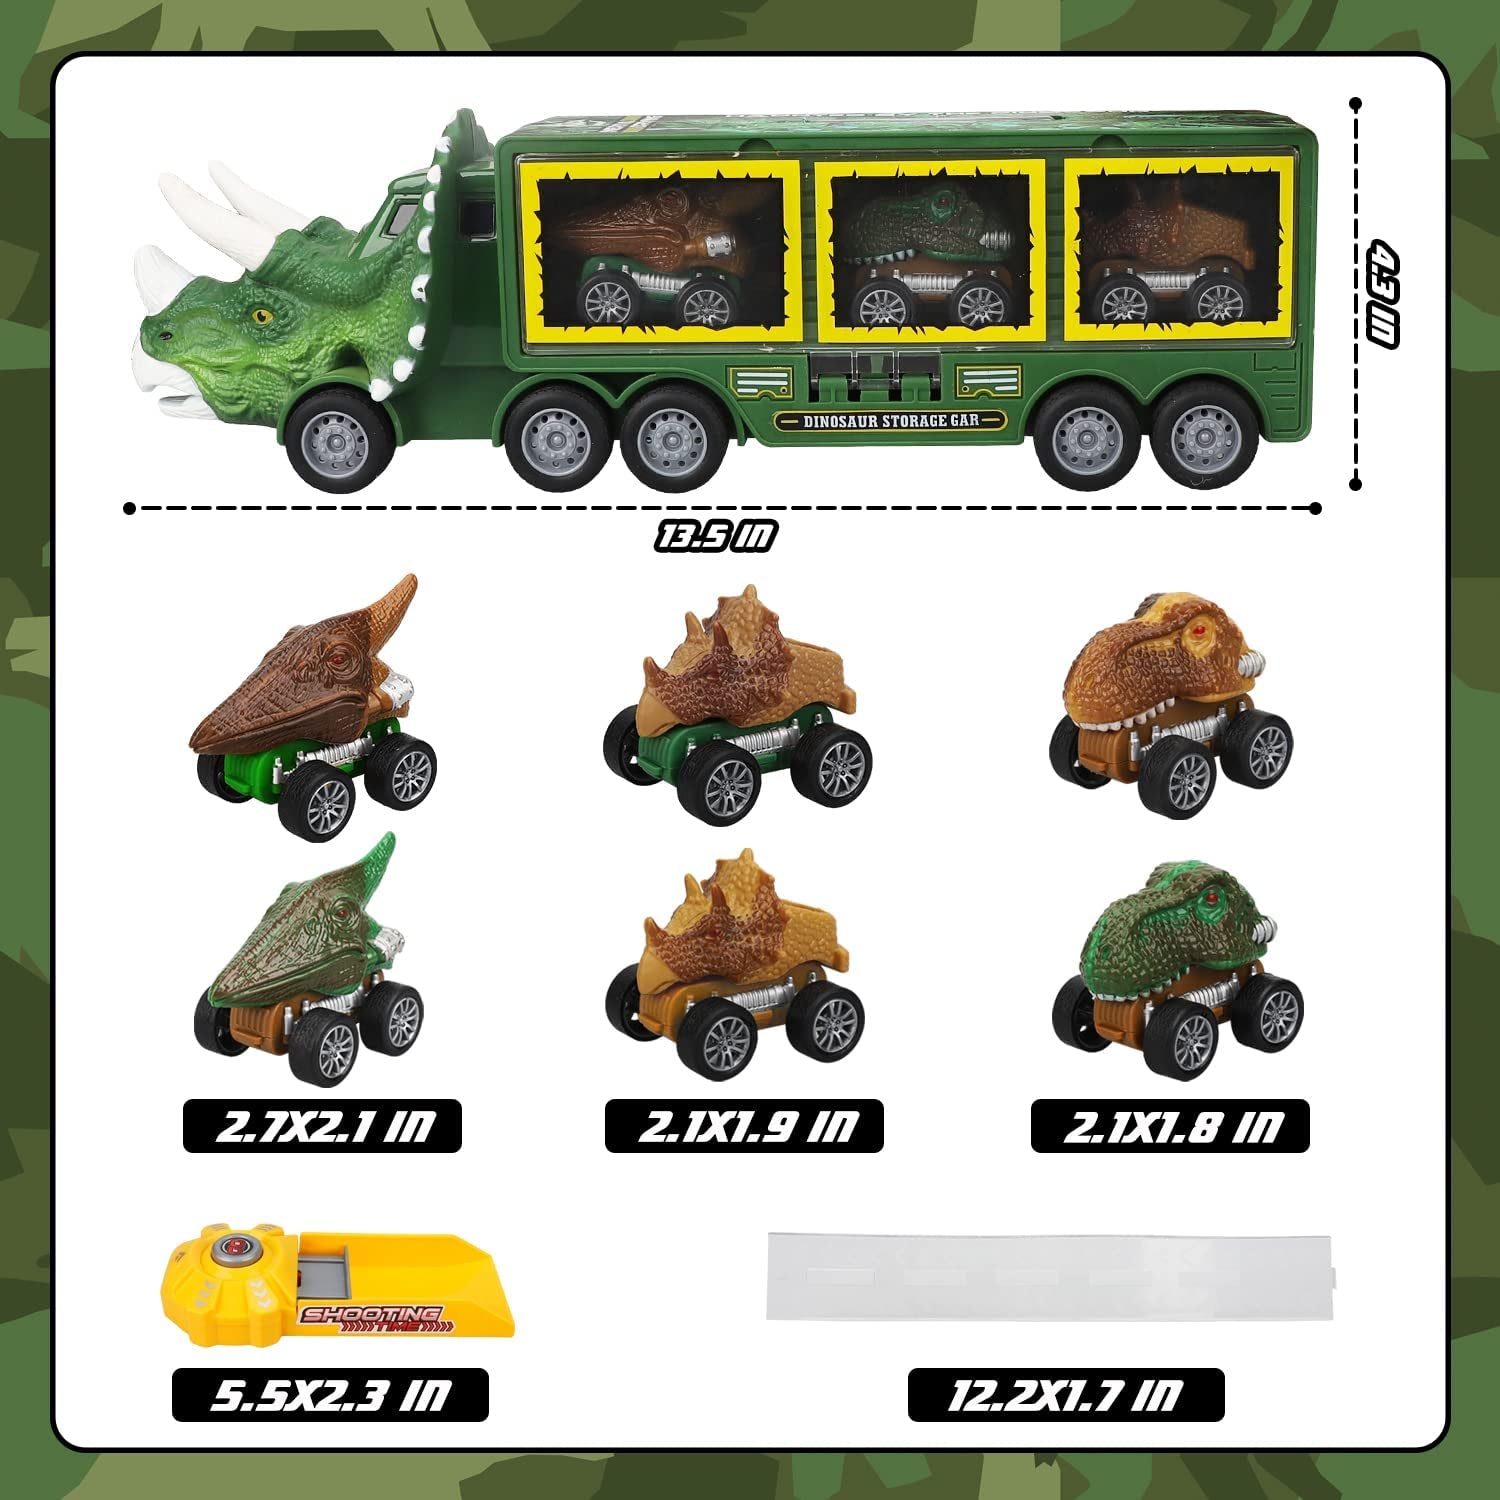 TOY Life Dinosaur Toys for Kids 3-7, Dinosaur Truck with 6 Pull Back Dinosaur Cars, 8 in 1 Dino Toys for Boys and Girls, Dinosaur Transport Truck with High Speed Launcher for Kids